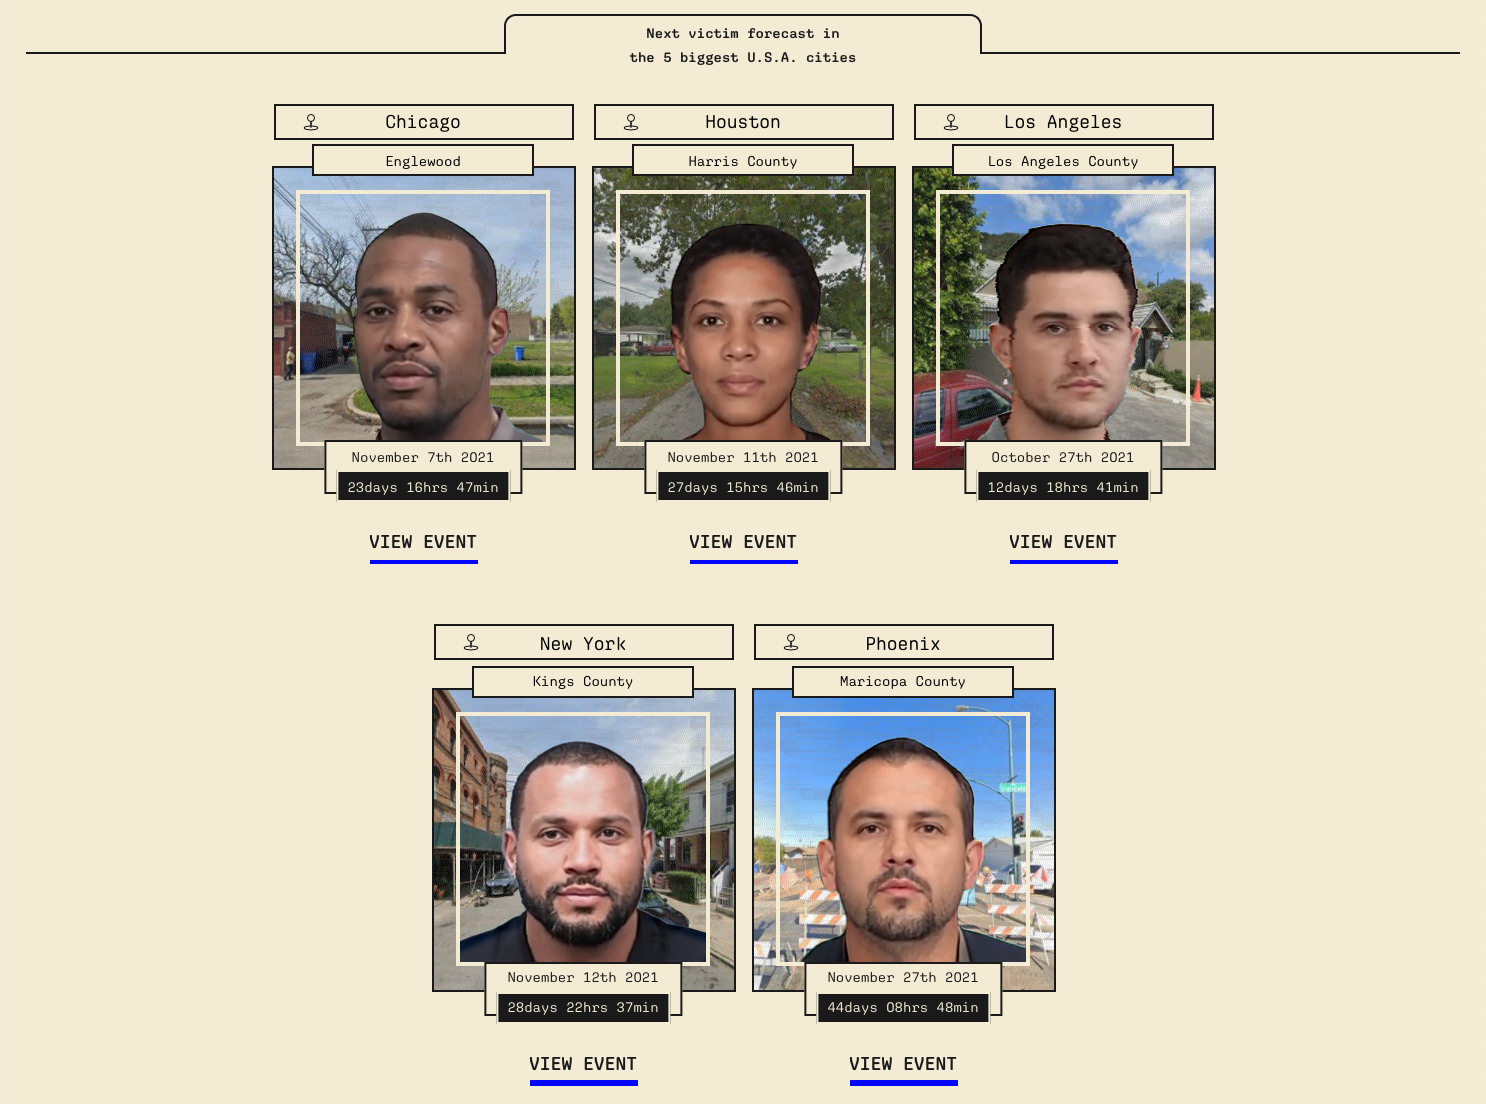 Future Wakes features fictional stories about police killings that are based on real data.